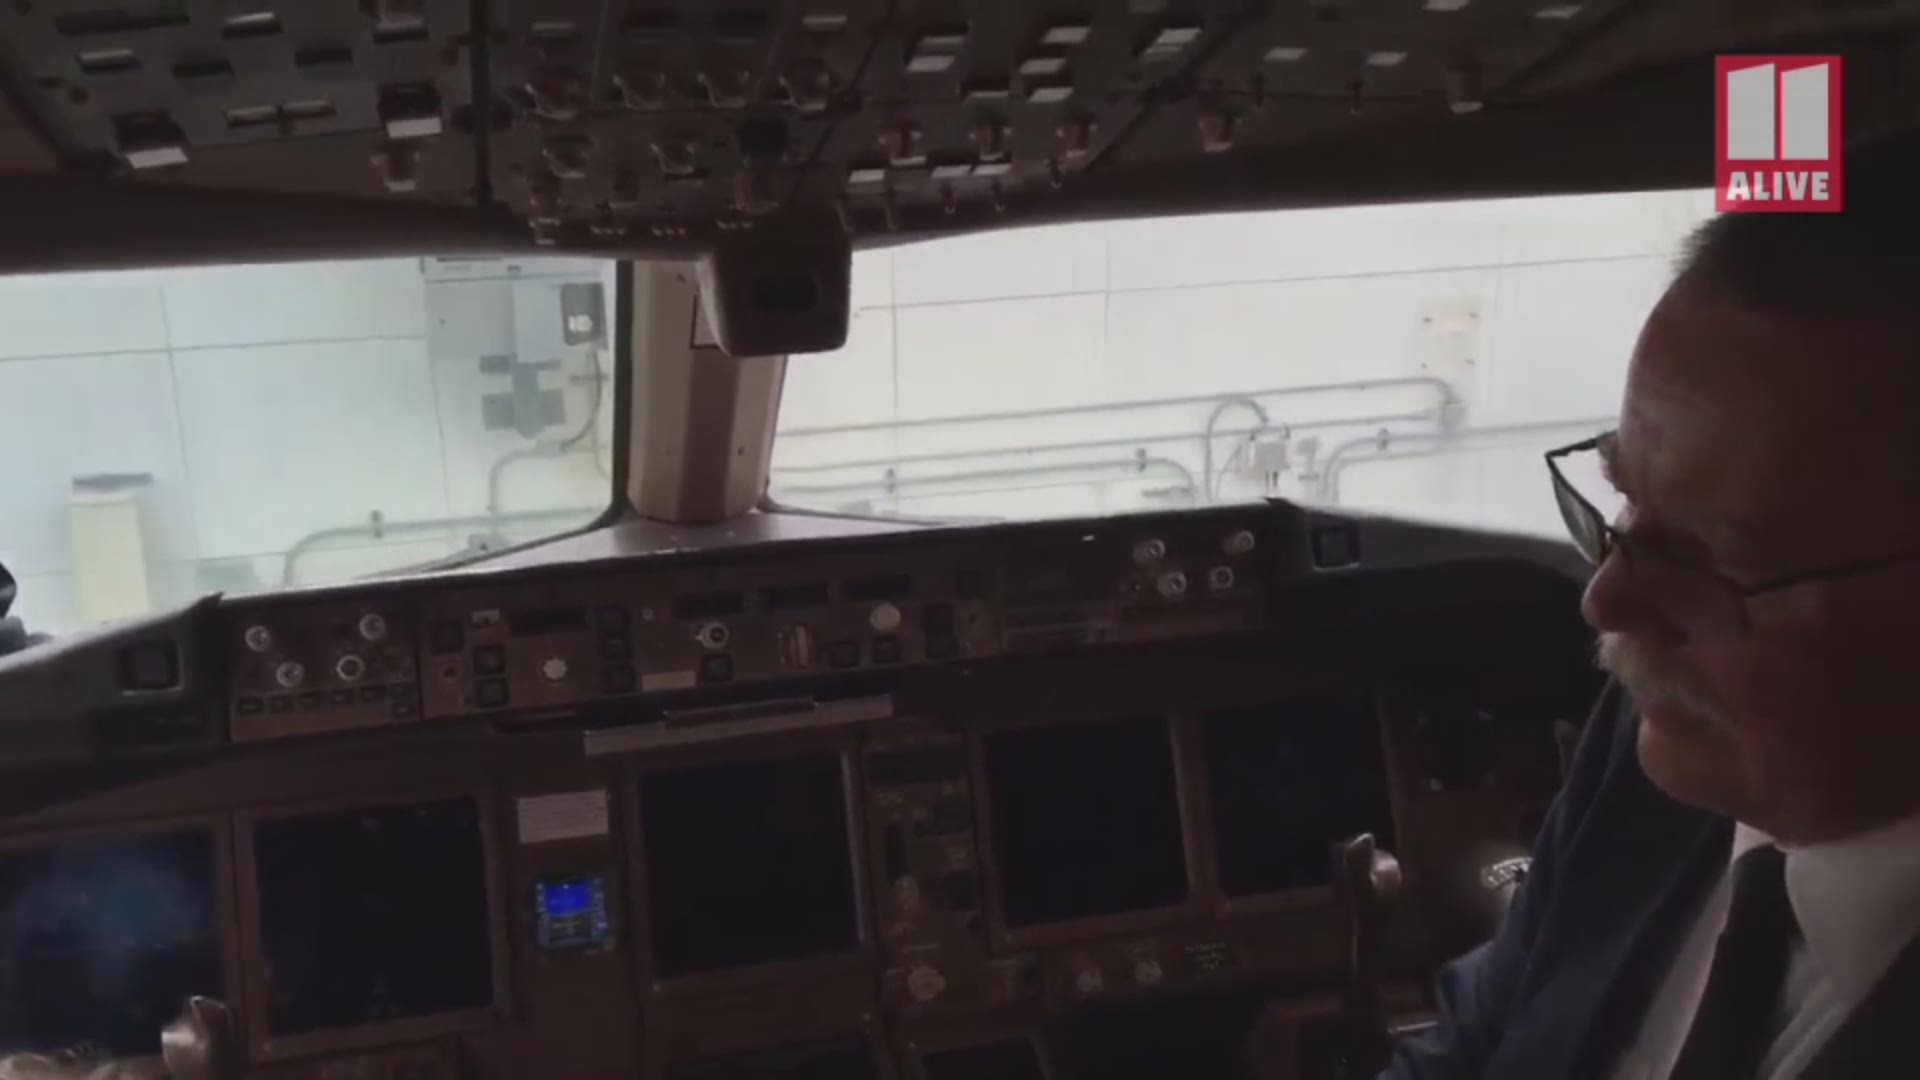 An American Airlines pilot retiring after 35 years gave his wings to a Florida toddler with Down syndrome after his final flight. Video provided by American Airlines